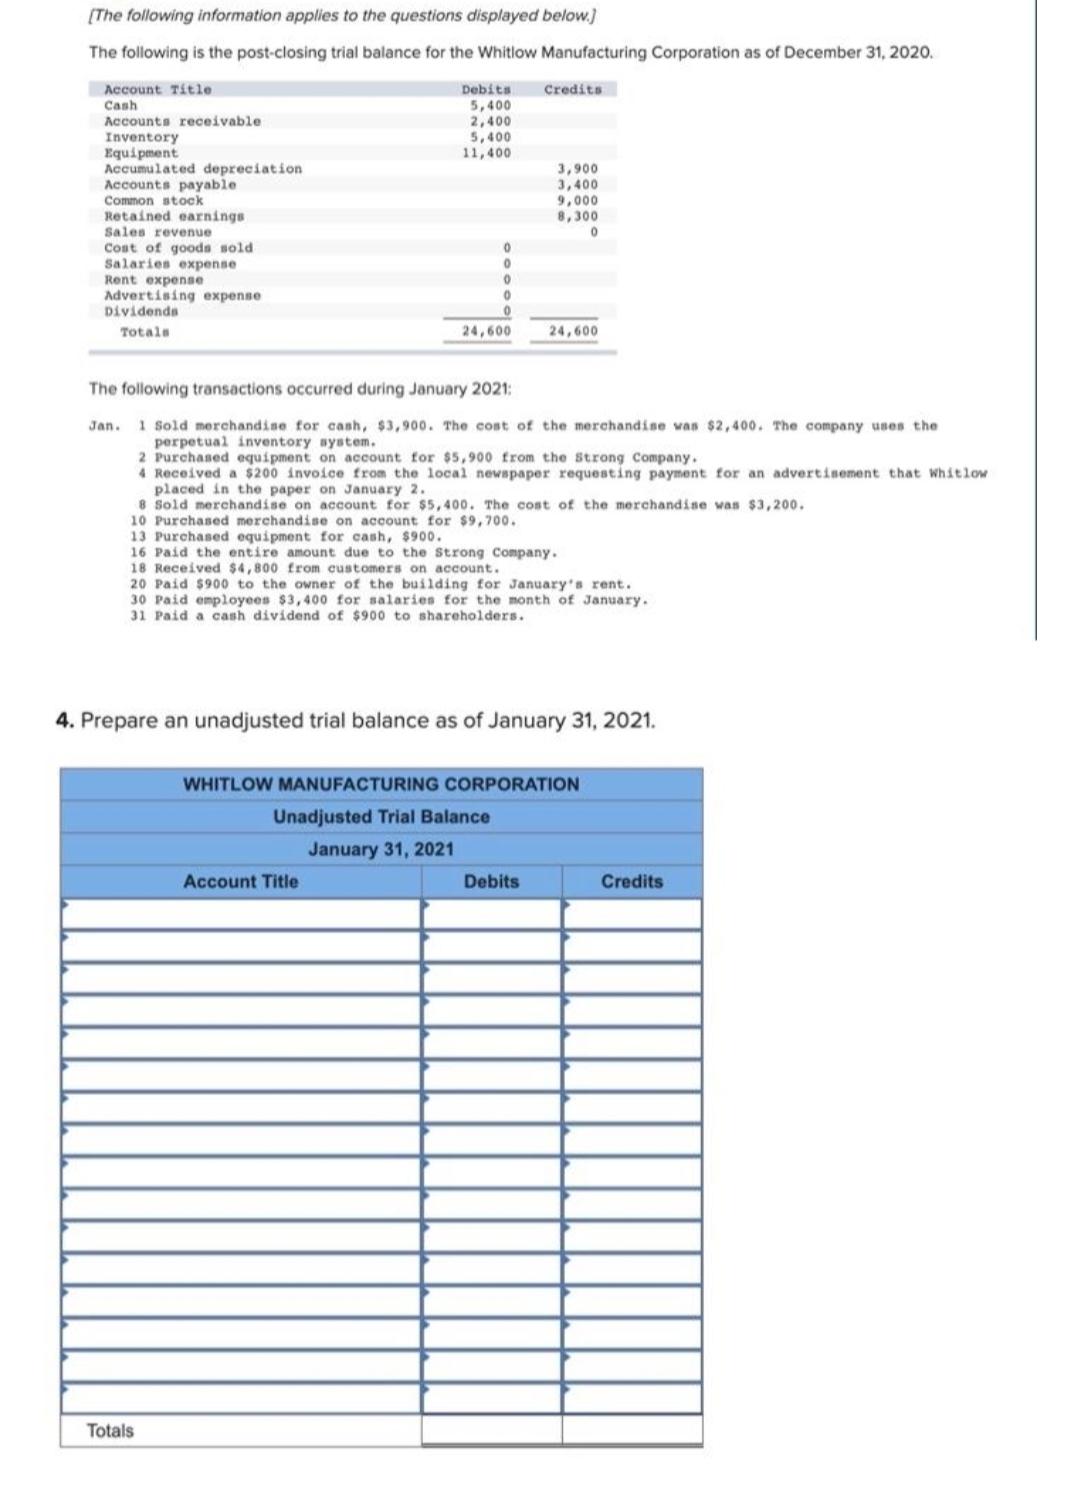 [The following information applies to the questions displayed below.]
The following is the post-closing trial balance for the Whitlow Manufacturing Corporation as of December 31, 2020.
Account Title
Cash
Accounts receivable
Inventory
Equipment
Accumulated depreciation.
Accounts payable
Common stock
Retained earnings
Sales revenue
Cost of goods sold
Salaries expense
Rent expense
Advertising expense
Dividends
Totals
Debits
5,400
2,400
5,400
11,400
Totals
0
0
24,600
Account Title
The following transactions occurred during January 2021:
Jan. 1 Sold merchandise for cash, $3,900. The cost of the merchandise was $2,400. The company uses the
perpetual inventory system.
2 Purchased equipment on account for $5,900 from the Strong Company.
4 Received a $200 invoice from the local newspaper requesting payment for an advertisement that Whitlow
placed in the paper on January 2.
8 Sold merchandise on account for $5,400. The cost of the merchandise was $3,200.
ИСКА
10 Purchased merchandise on account for $9,700.
13 Purchased equipment for cash, $900.
16 Paid the entire amount due to the Strong Company.
Unadjusted Trial Balance
January 31, 2021
Credits
18 Received $4,800 from customers on account.
20 Paid $900 to the owner of the building for January's rent.
30 Paid employees $3,400 for salaries for the month of January.
31 Paid a cash dividend of $900 to shareholders.
3,900
3,400
9,000
8,300
0
4. Prepare an unadjusted trial balance as of January 31, 2021.
24,600
WHITLOW MANUFACTURING CORPORATION
Debits
Credits